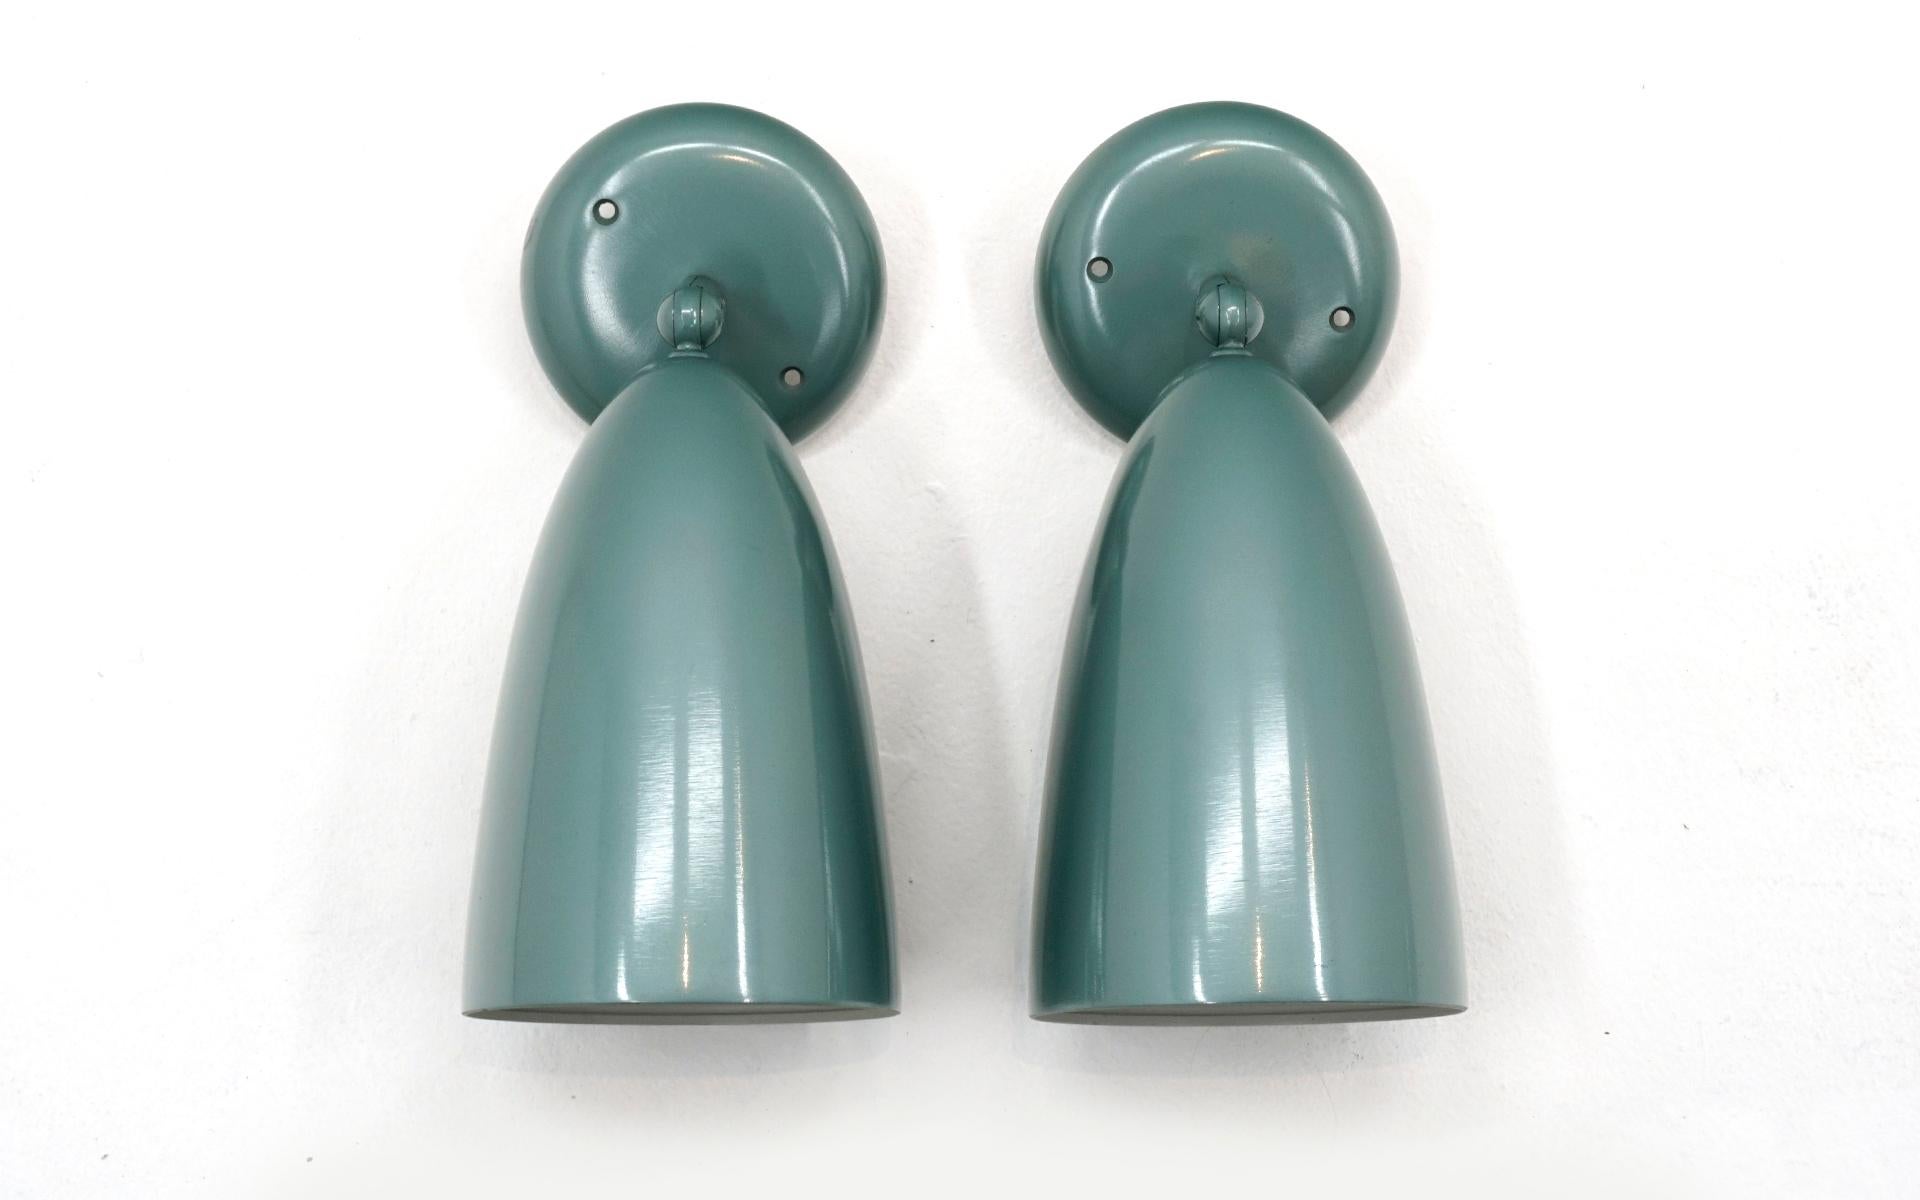 Matching pair of Prescolite wall sconces / light fixtures in mint condition. These are new old stock with the original boxes and hardware. These have never been used and are in new condition. Beautiful blue-green, teal color. Ready to install and